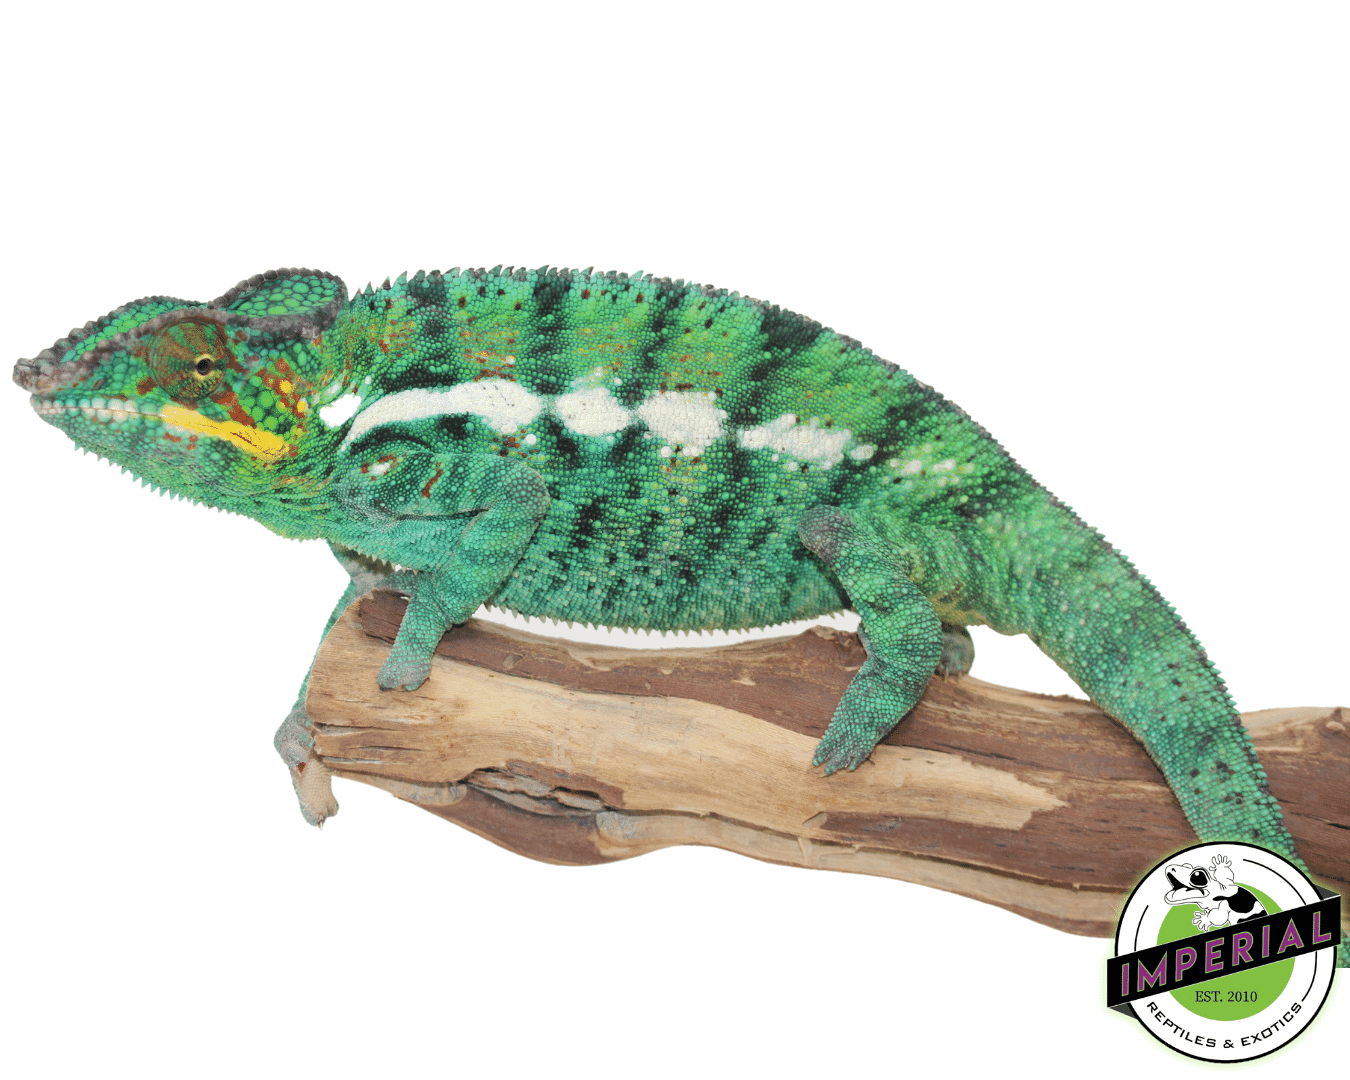 nosy be panther chameleon for sale, buy reptiles online